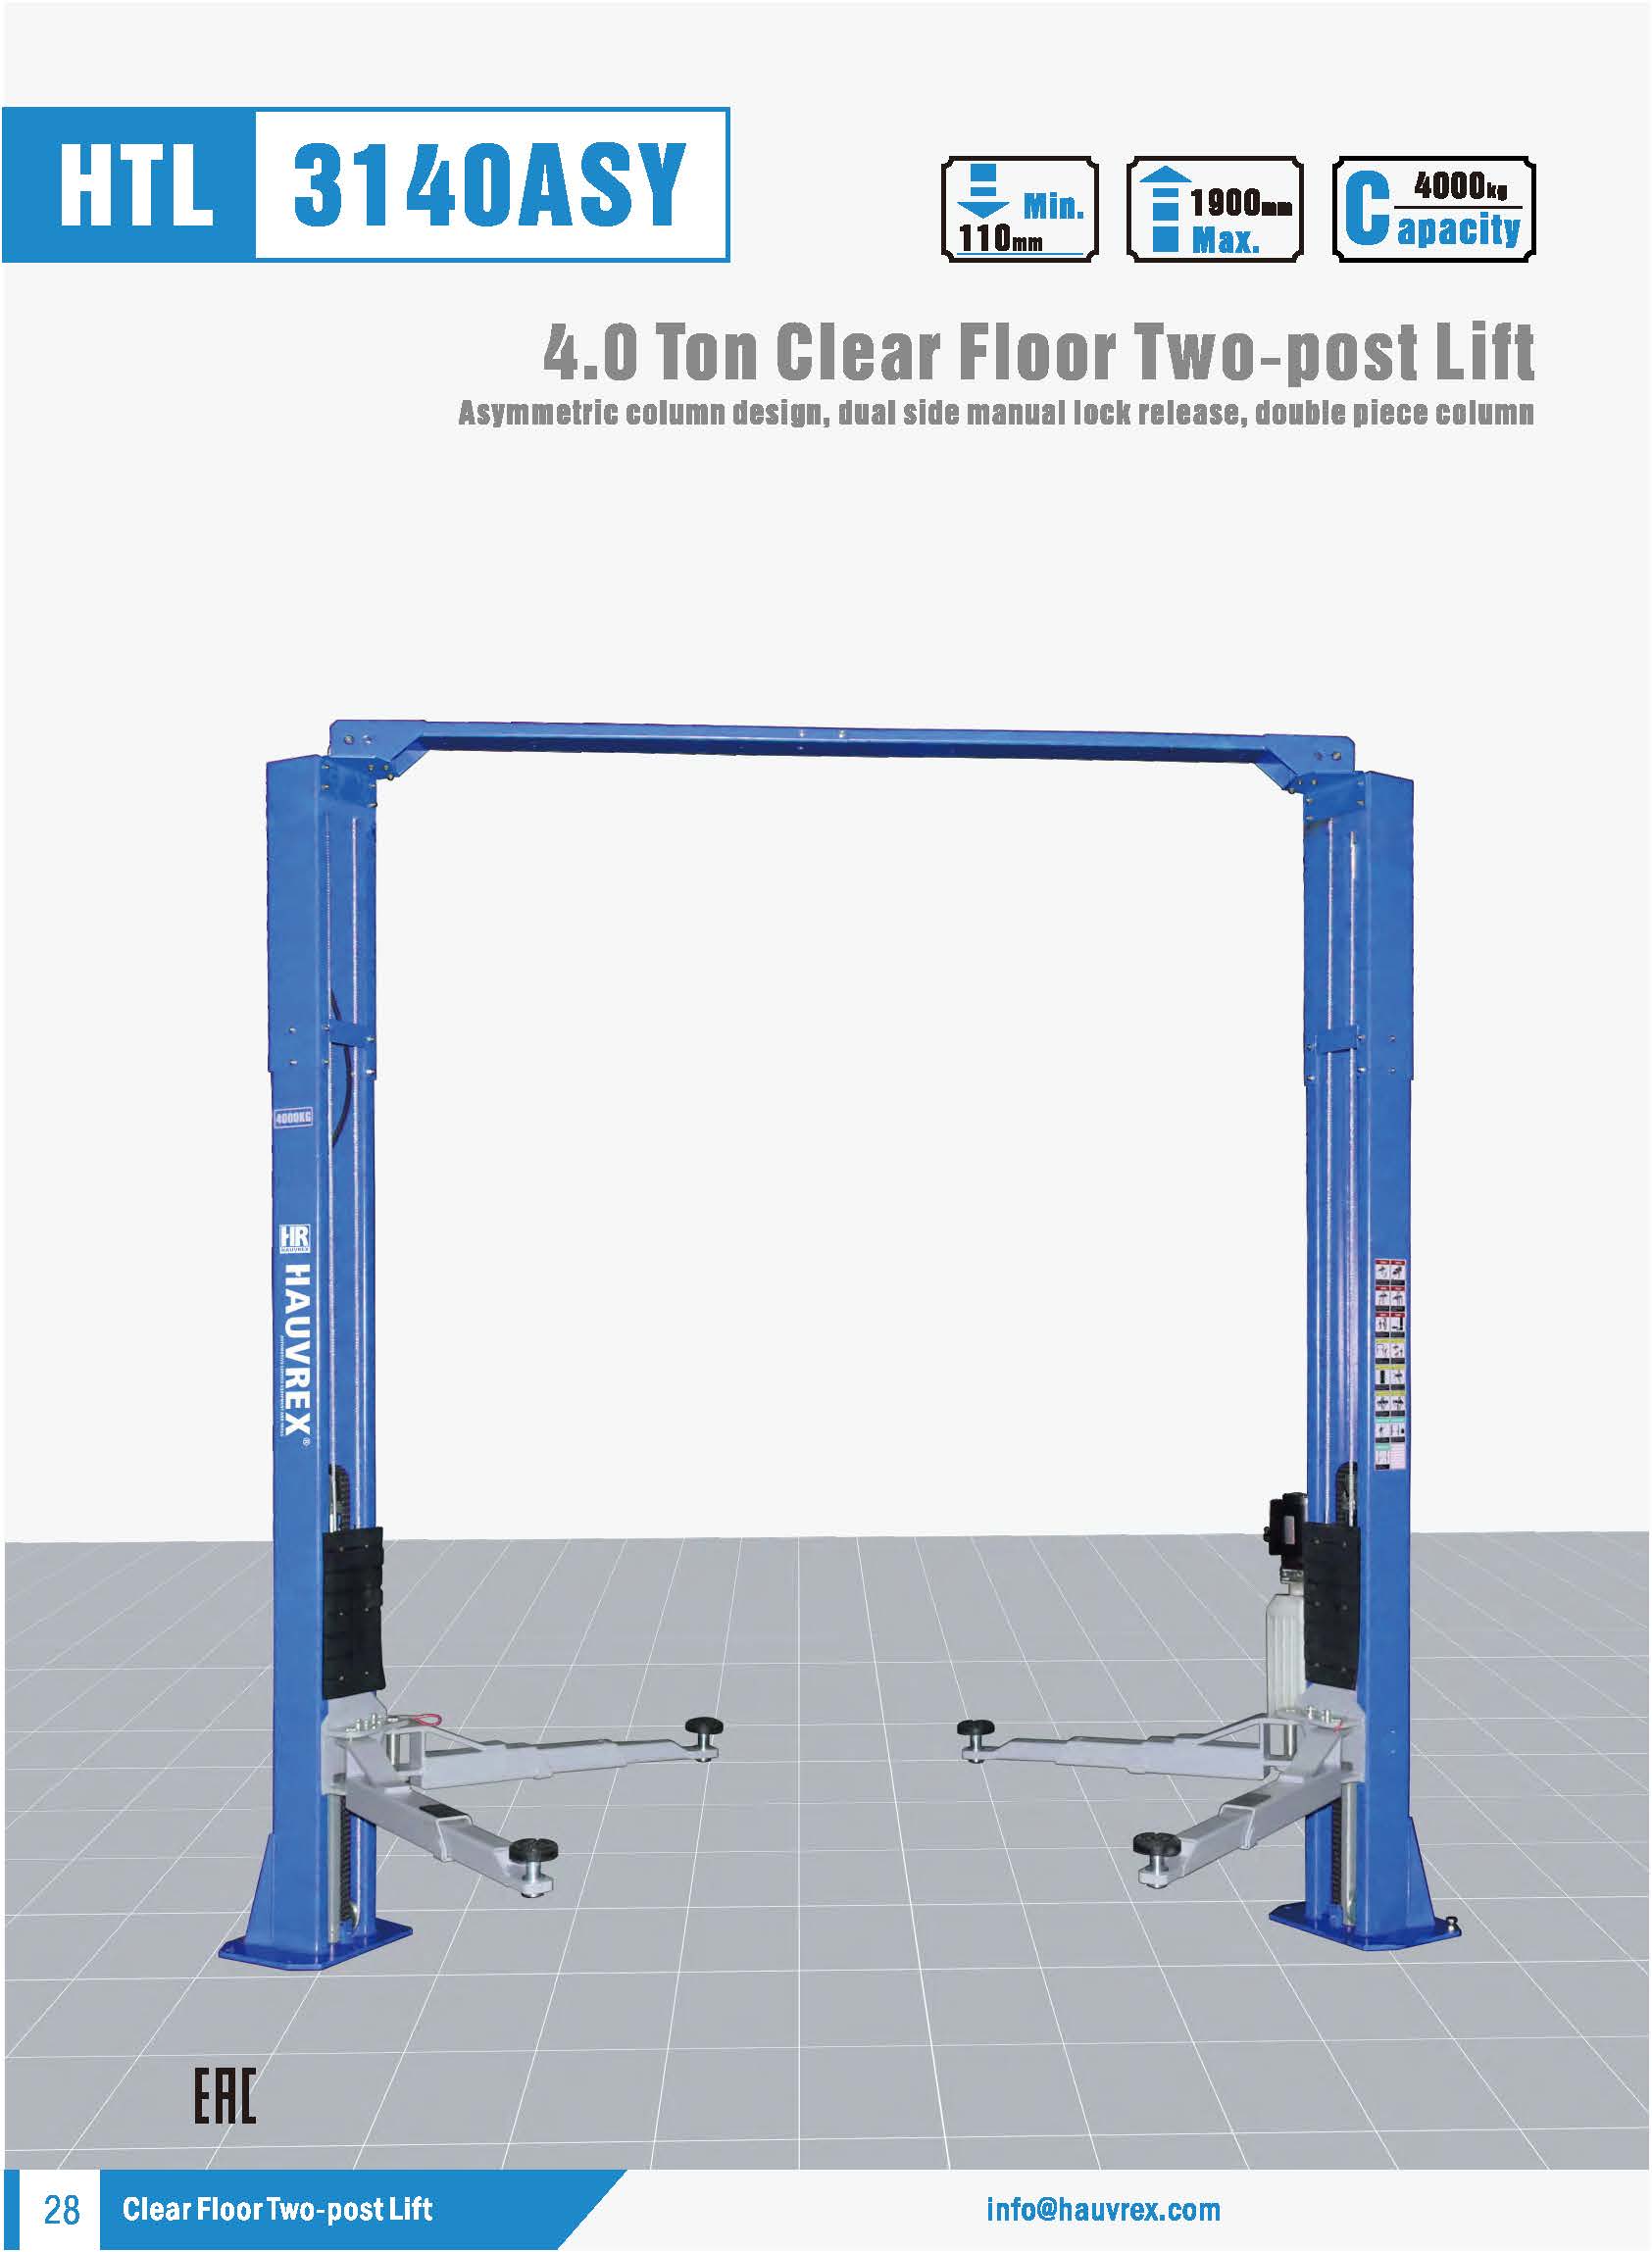 HTL3140ASY Two-post Lift